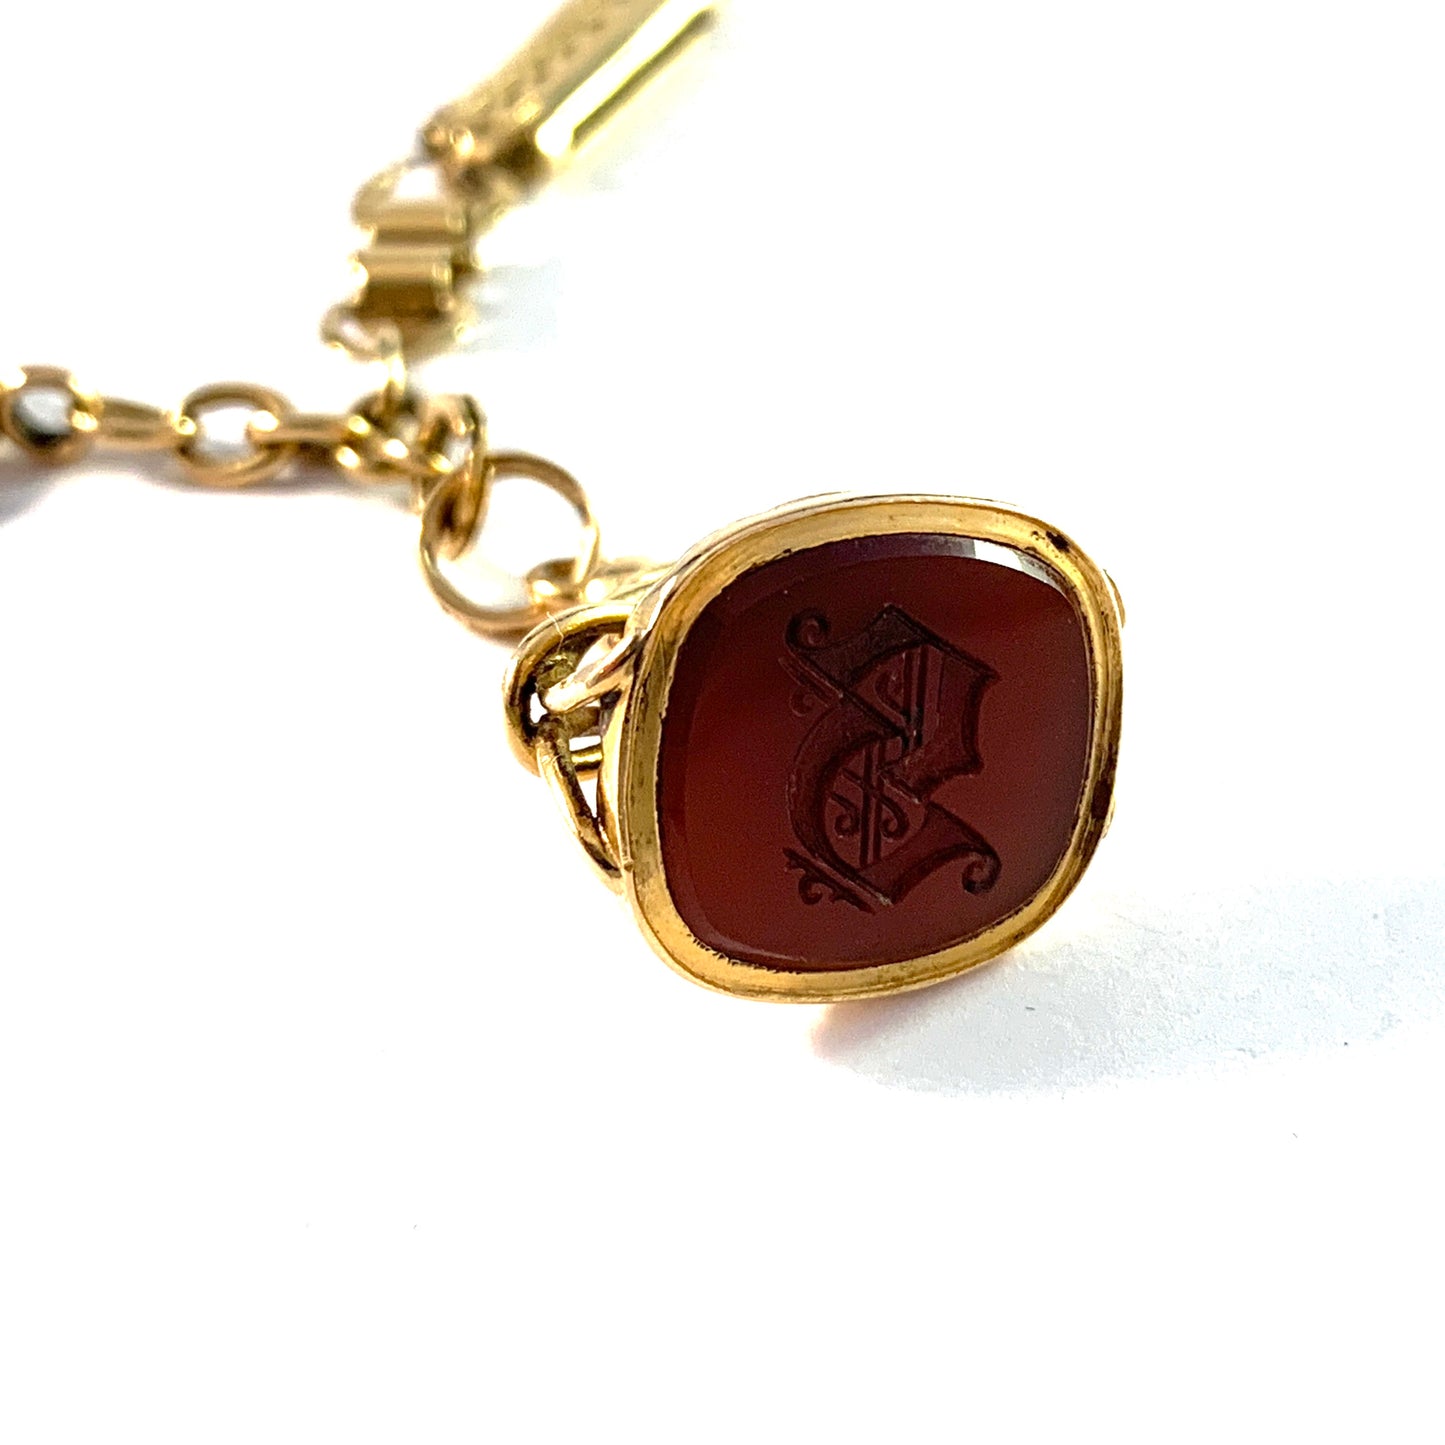 E Cederin, Sweden year 1912. Antique 18k Gold Watch Chain Wax Seal Fob. (Necklace Length)